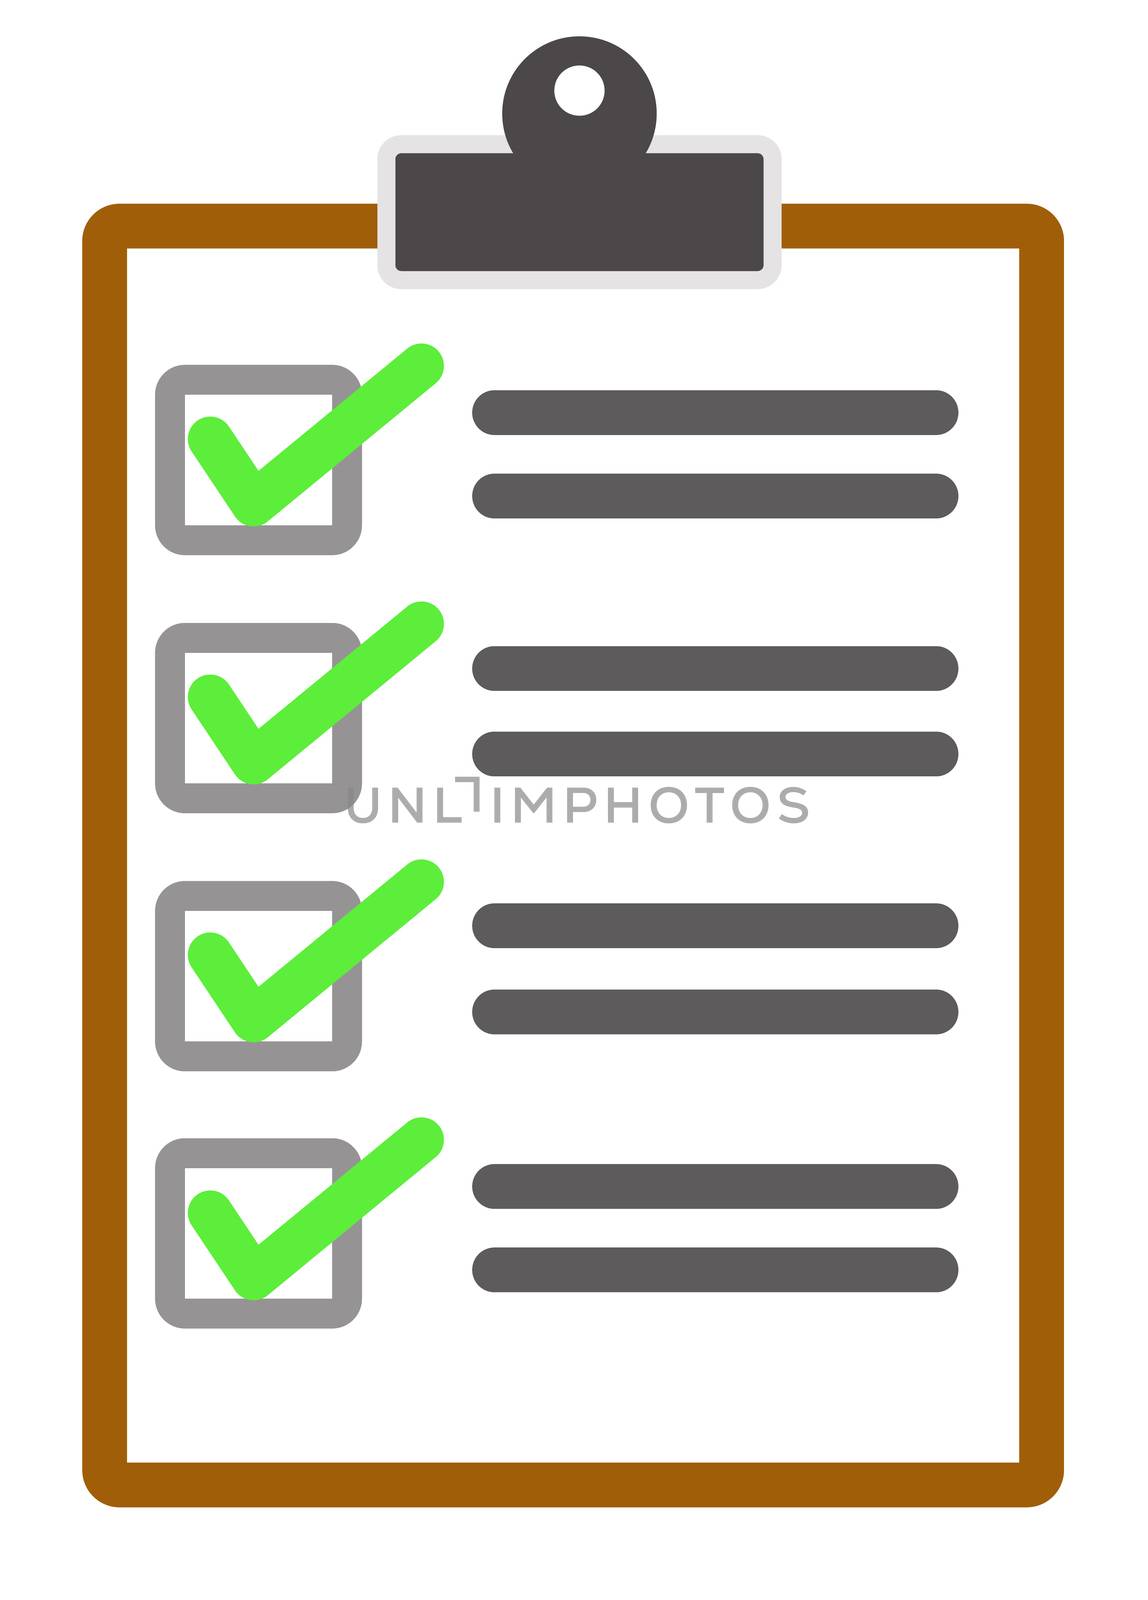 Checklist icon from Business on white background. Checklist icon for your web site design, logo, app, UI. flat style. clipboard symbol.

